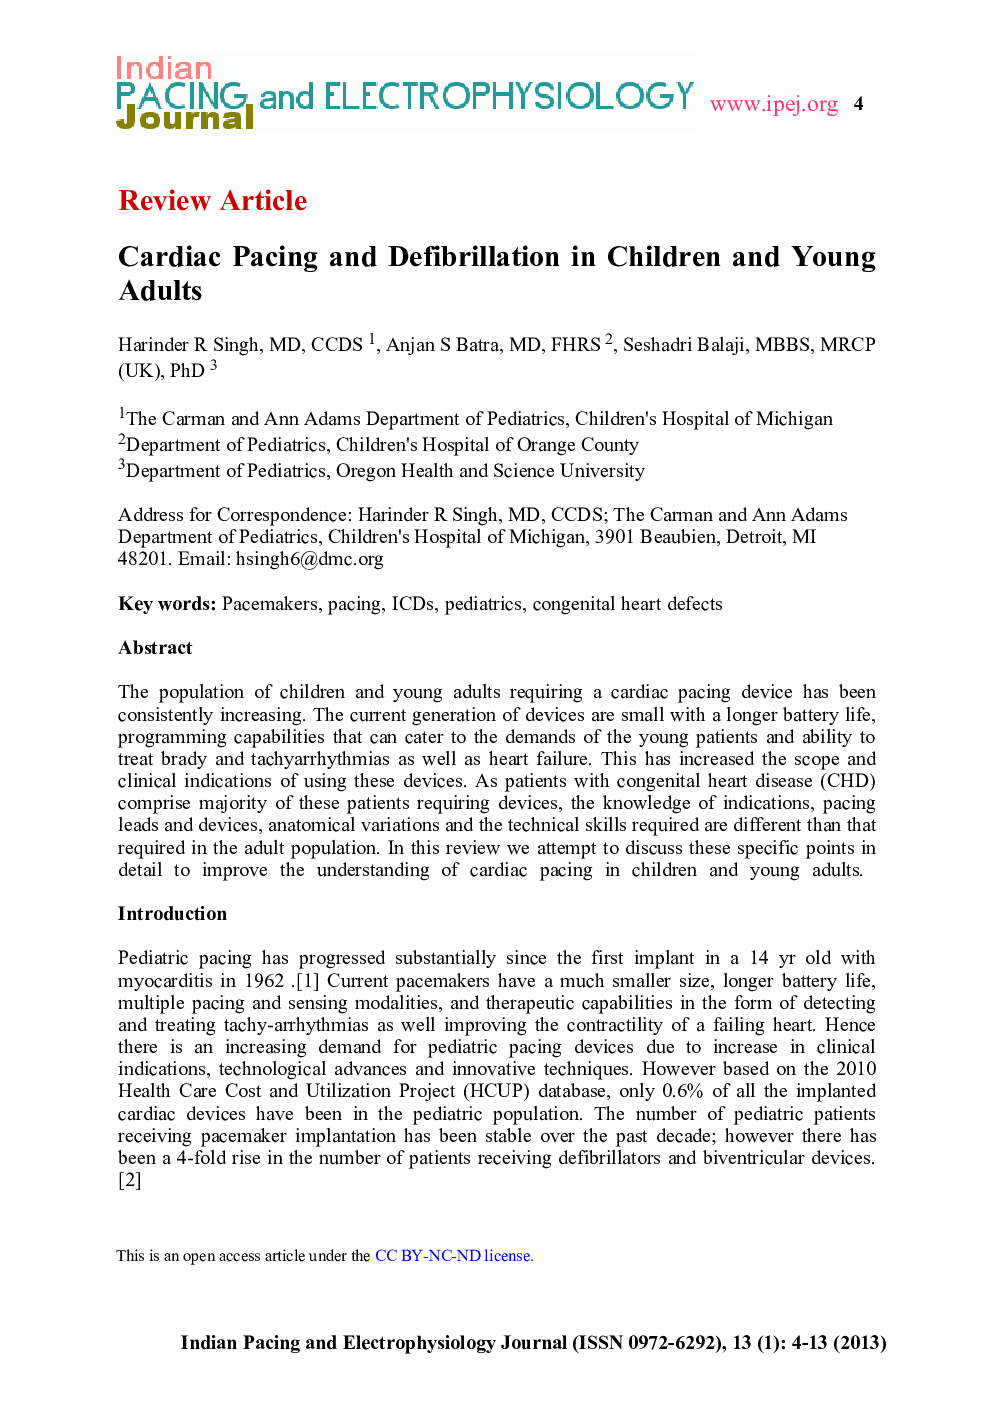 Cardiac Pacing and Defibrillation in Children and Young Adults